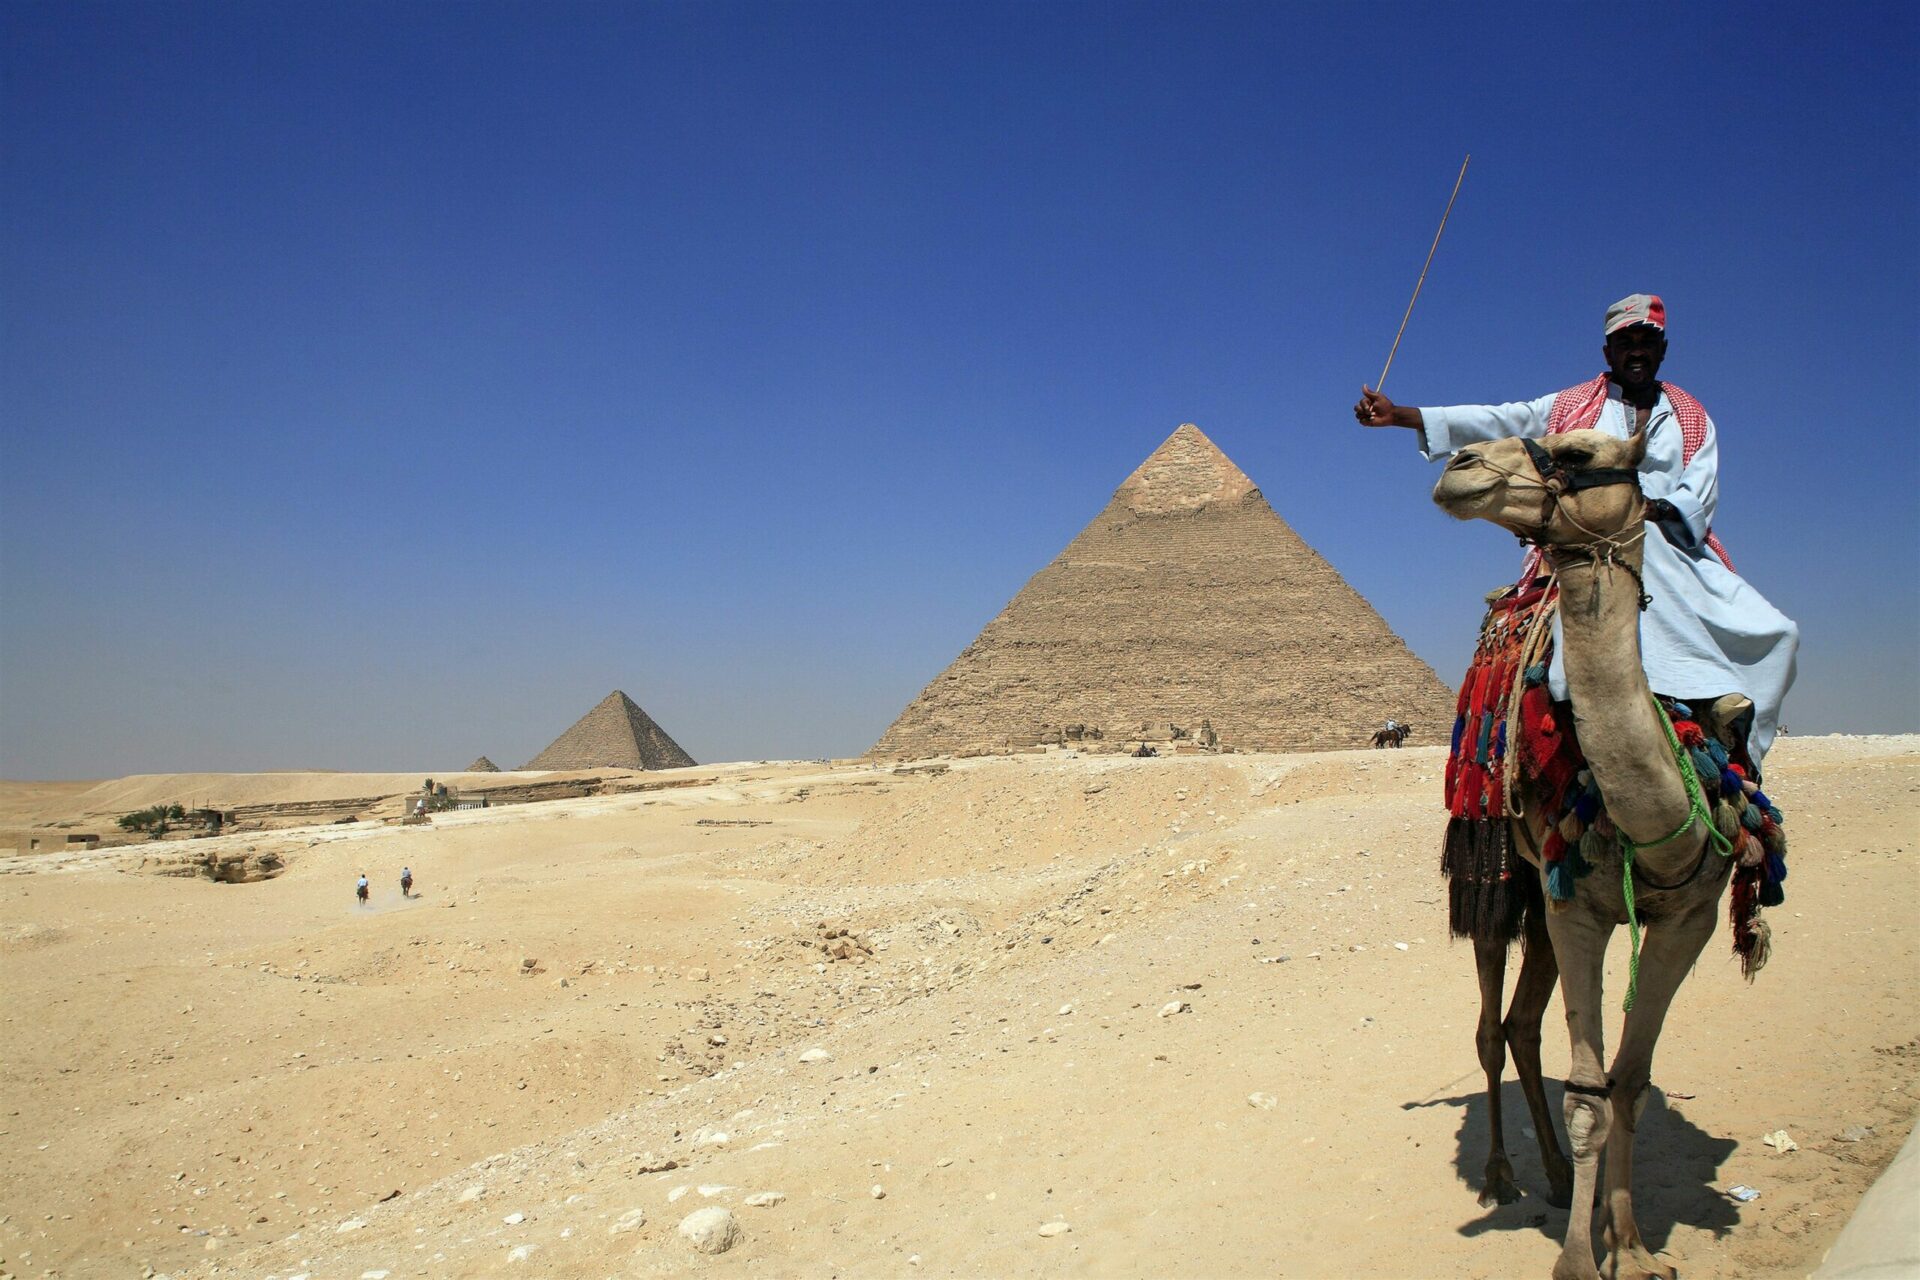 Great pyramids in background and Egyptian man on camel in foreground seen on Egypt safari